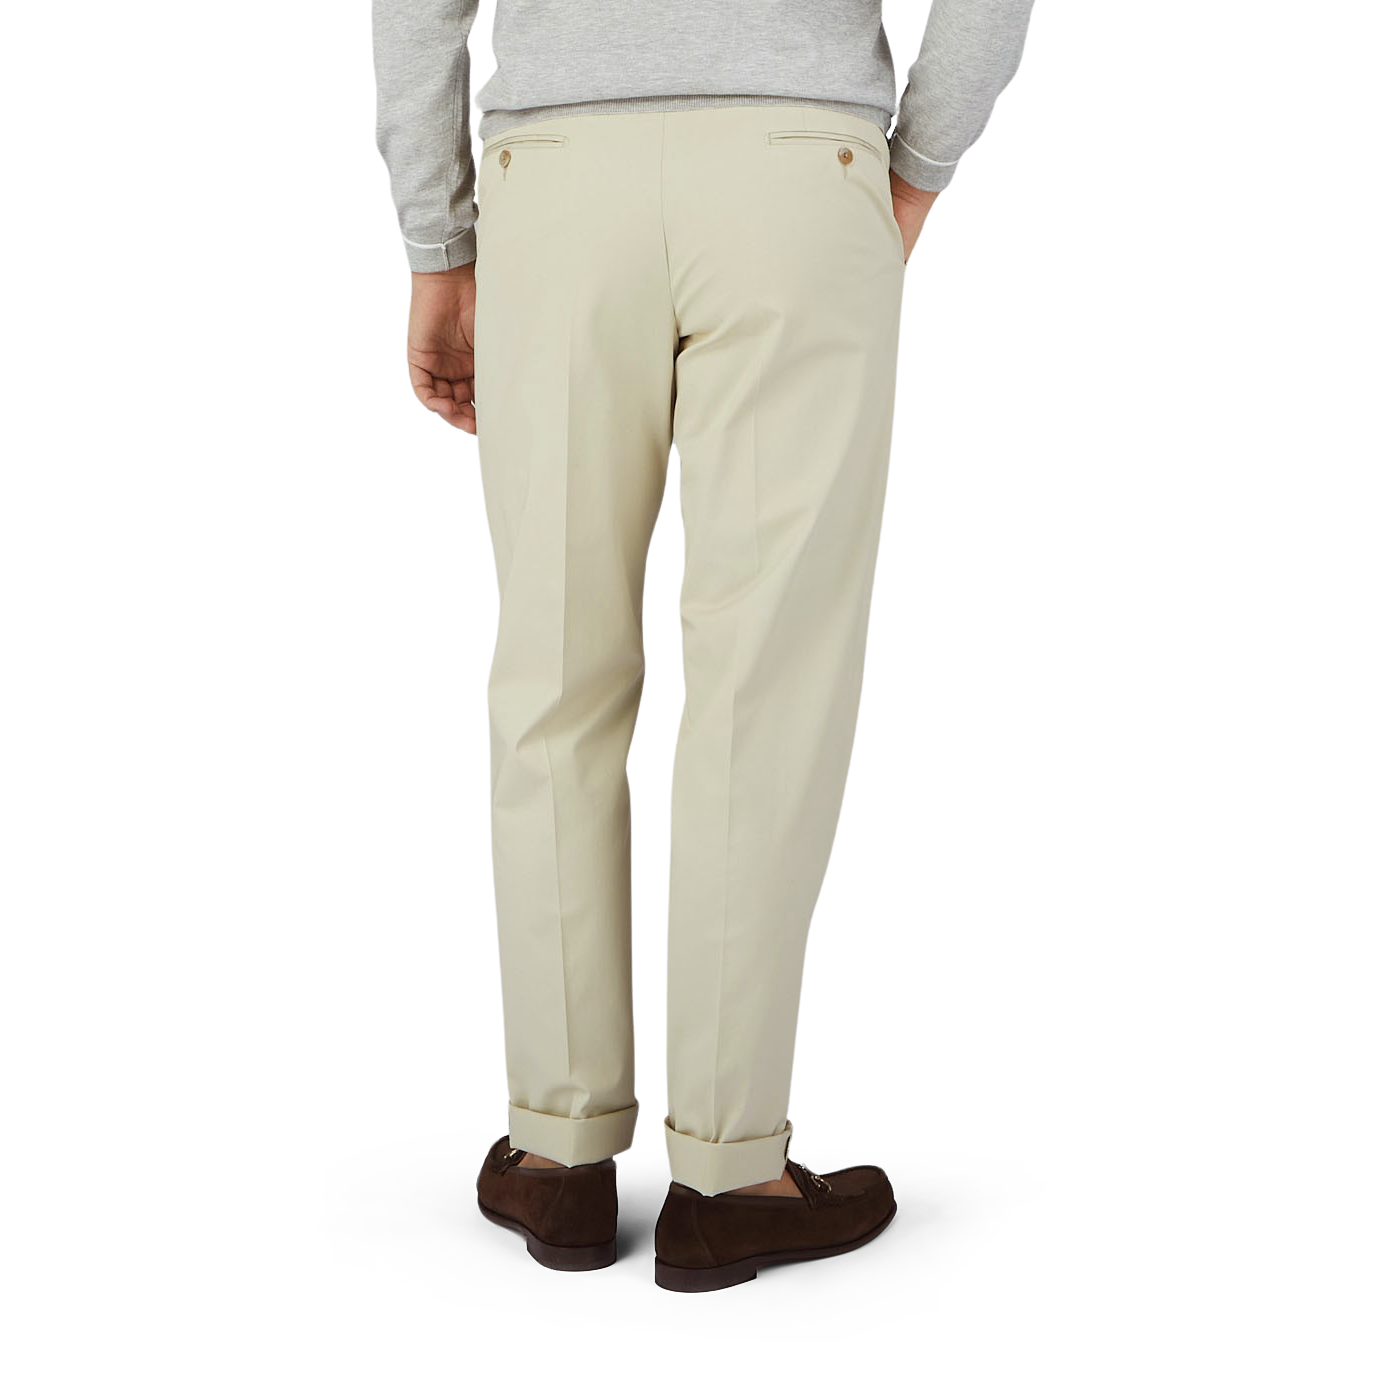 This is a man wearing Light Beige Cotton Twill Flat Front Trousers in a regular fit by Luigi Bianchi.